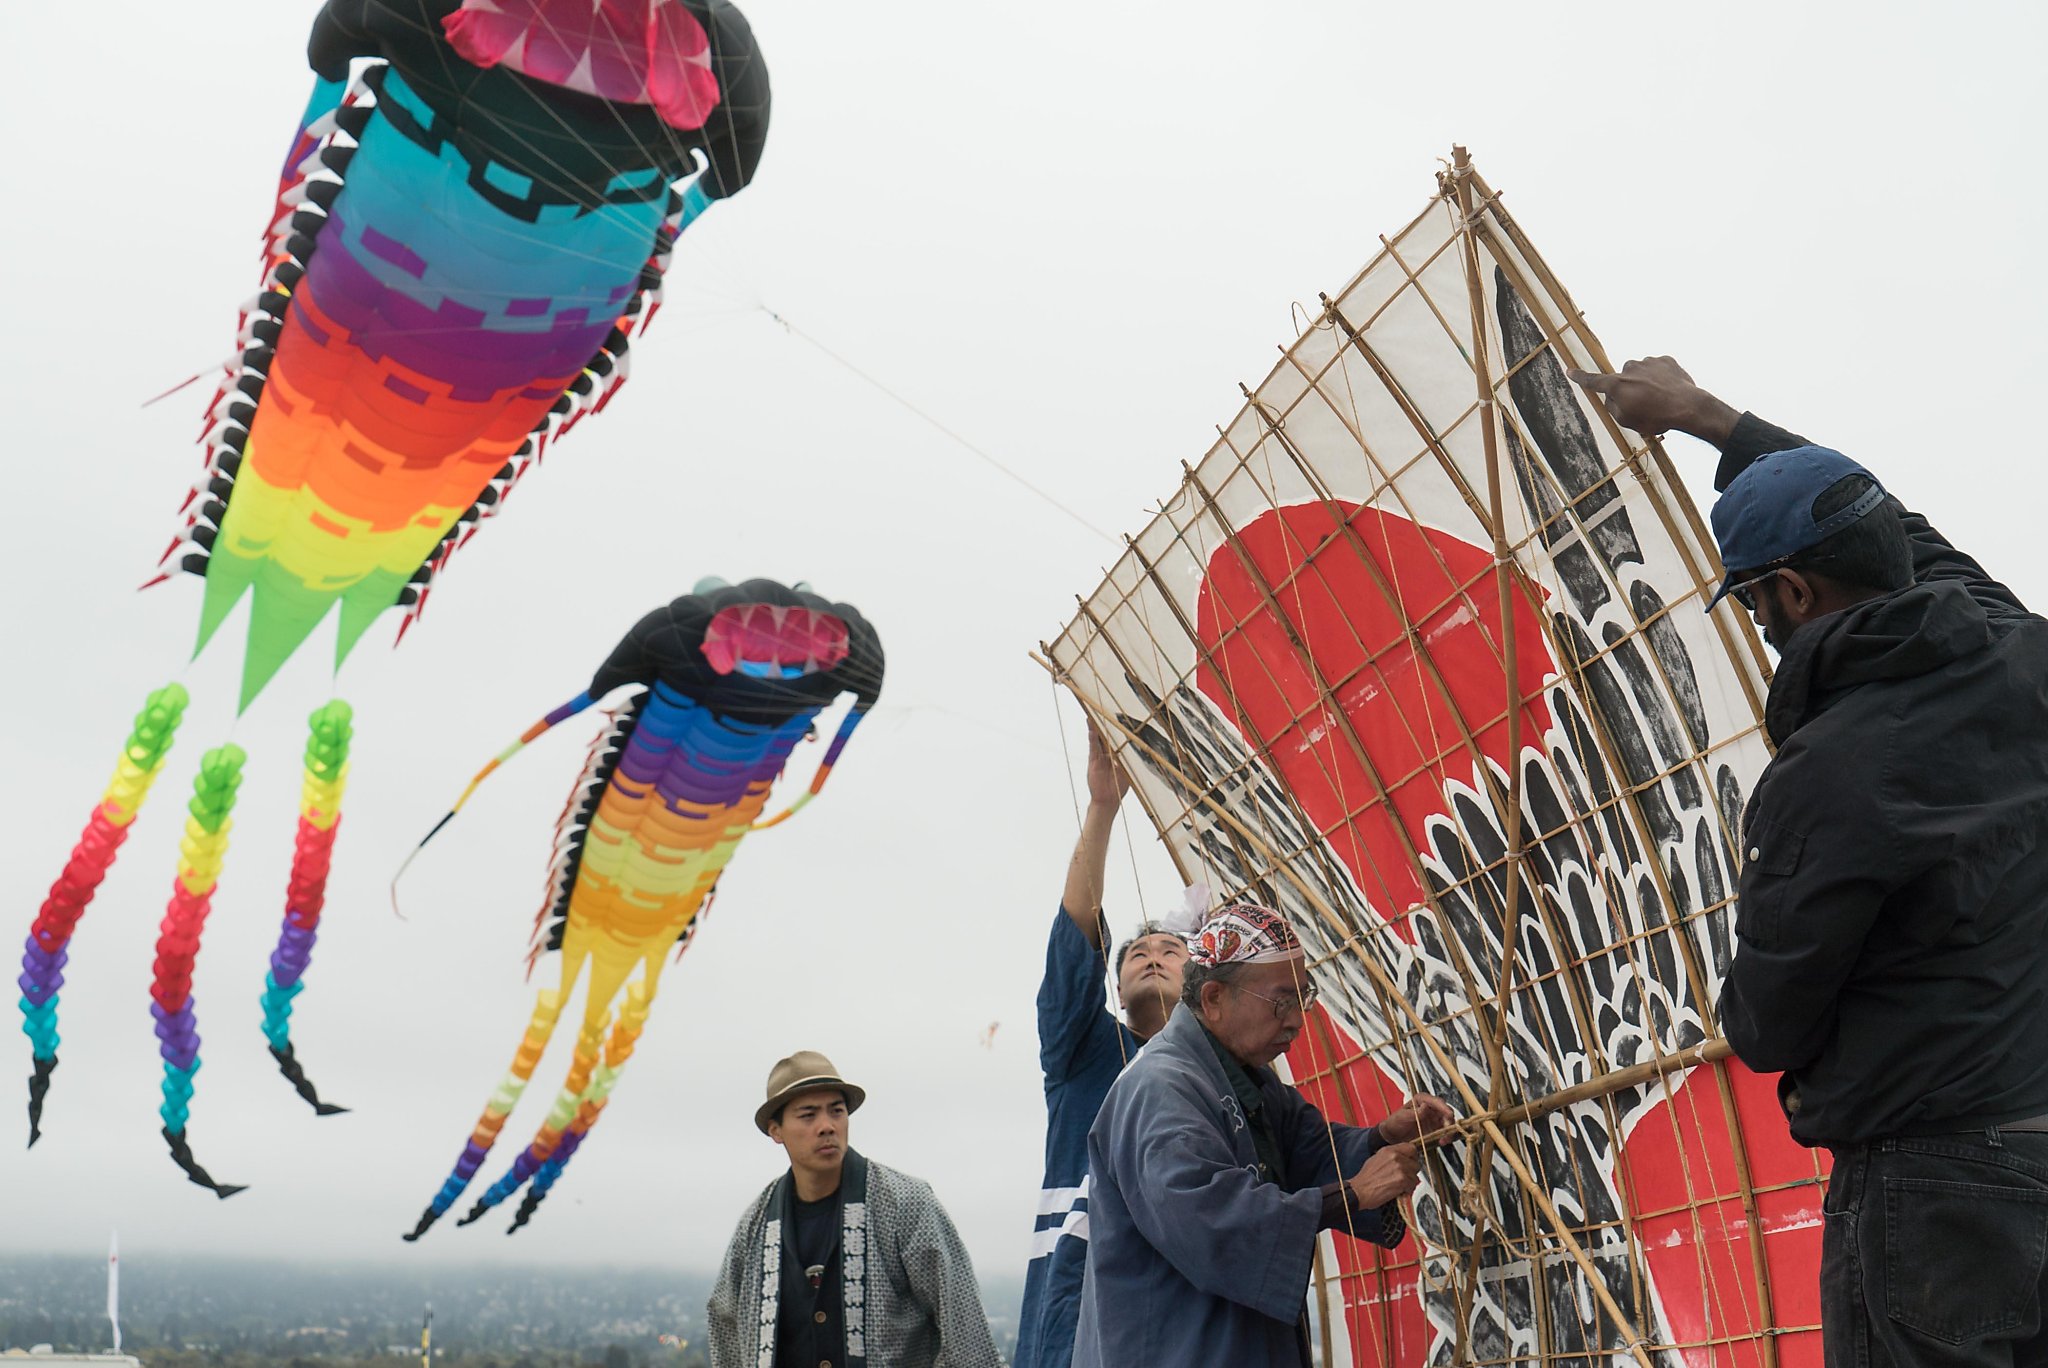 Excitement in the air at Berkeley Kite Festival SFGate